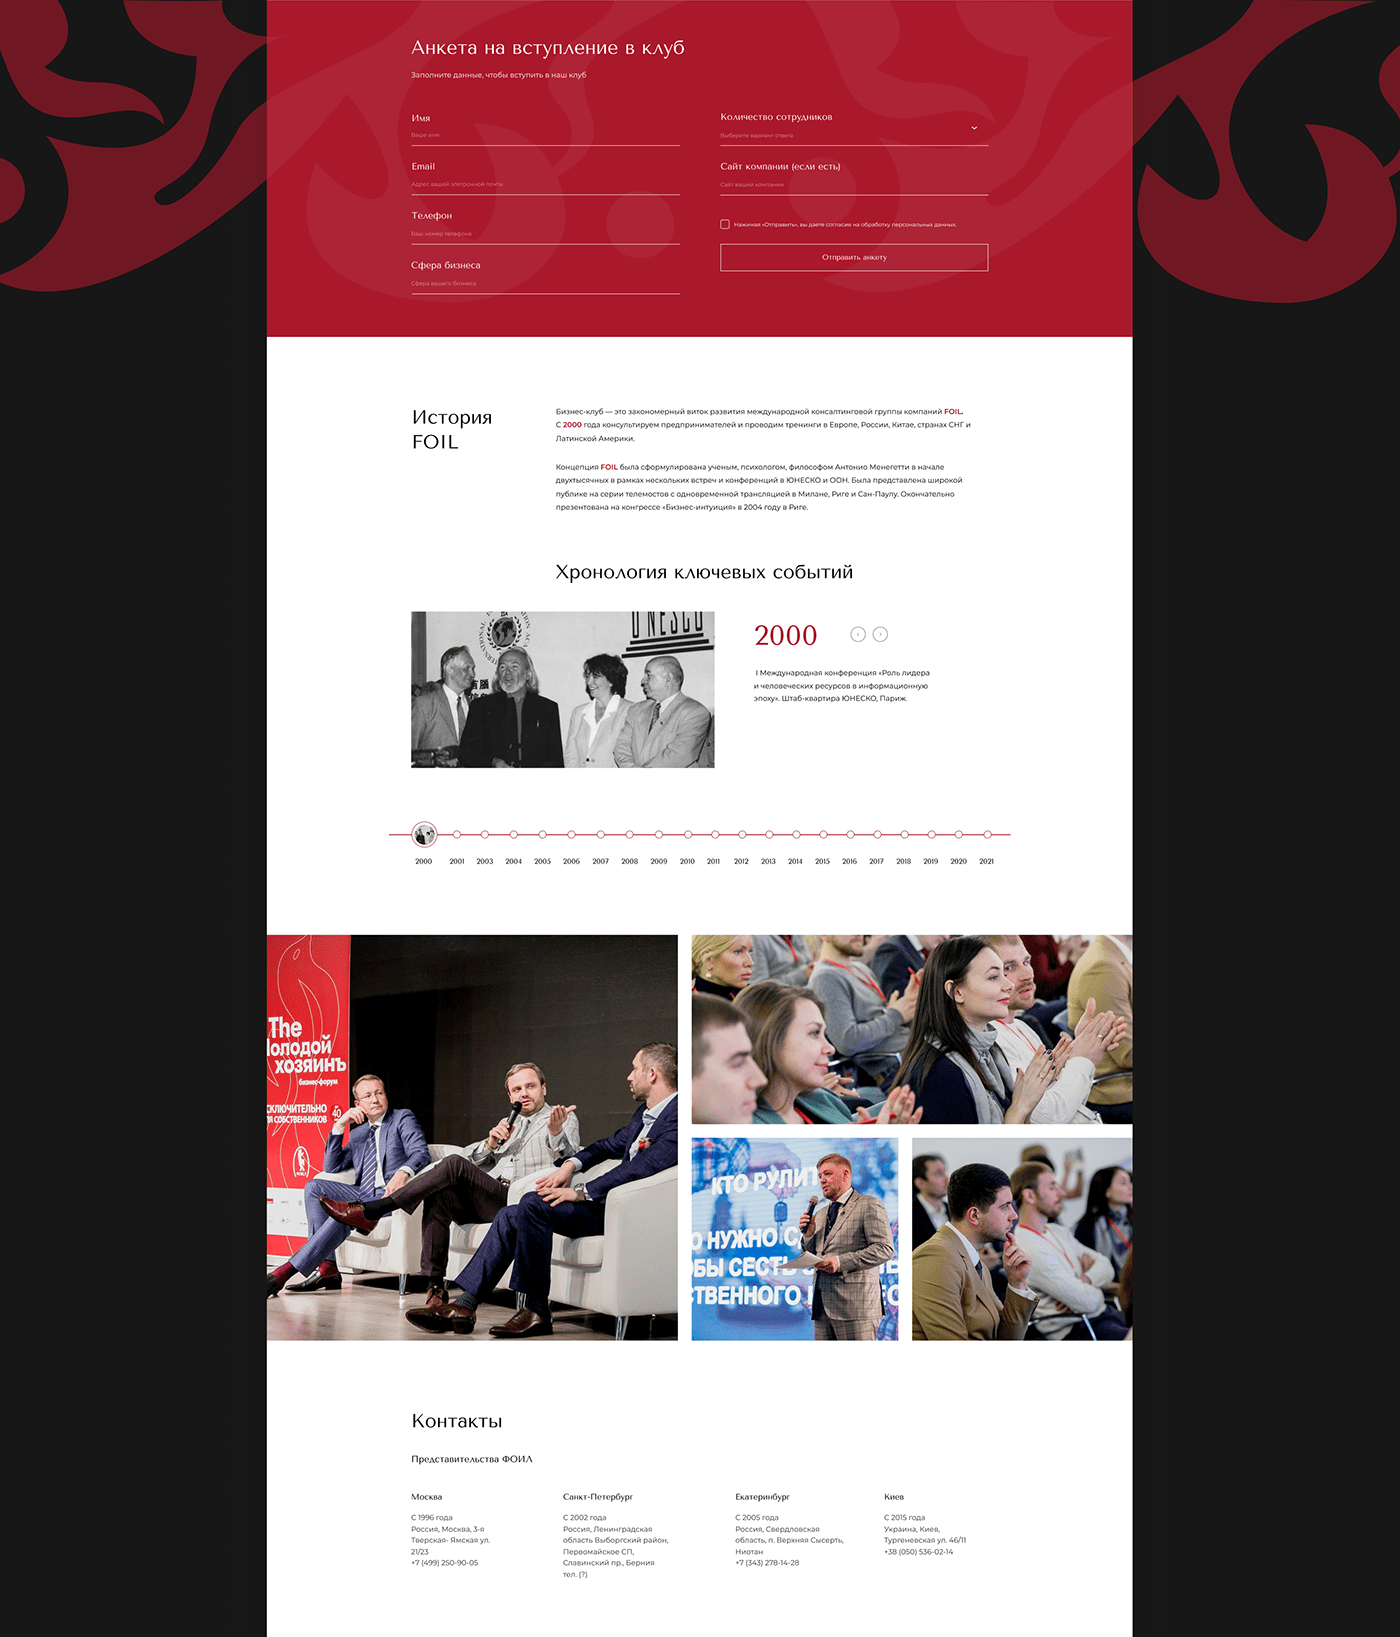 Business Club Consulting landing page serenity UI/UX Web Design  Website